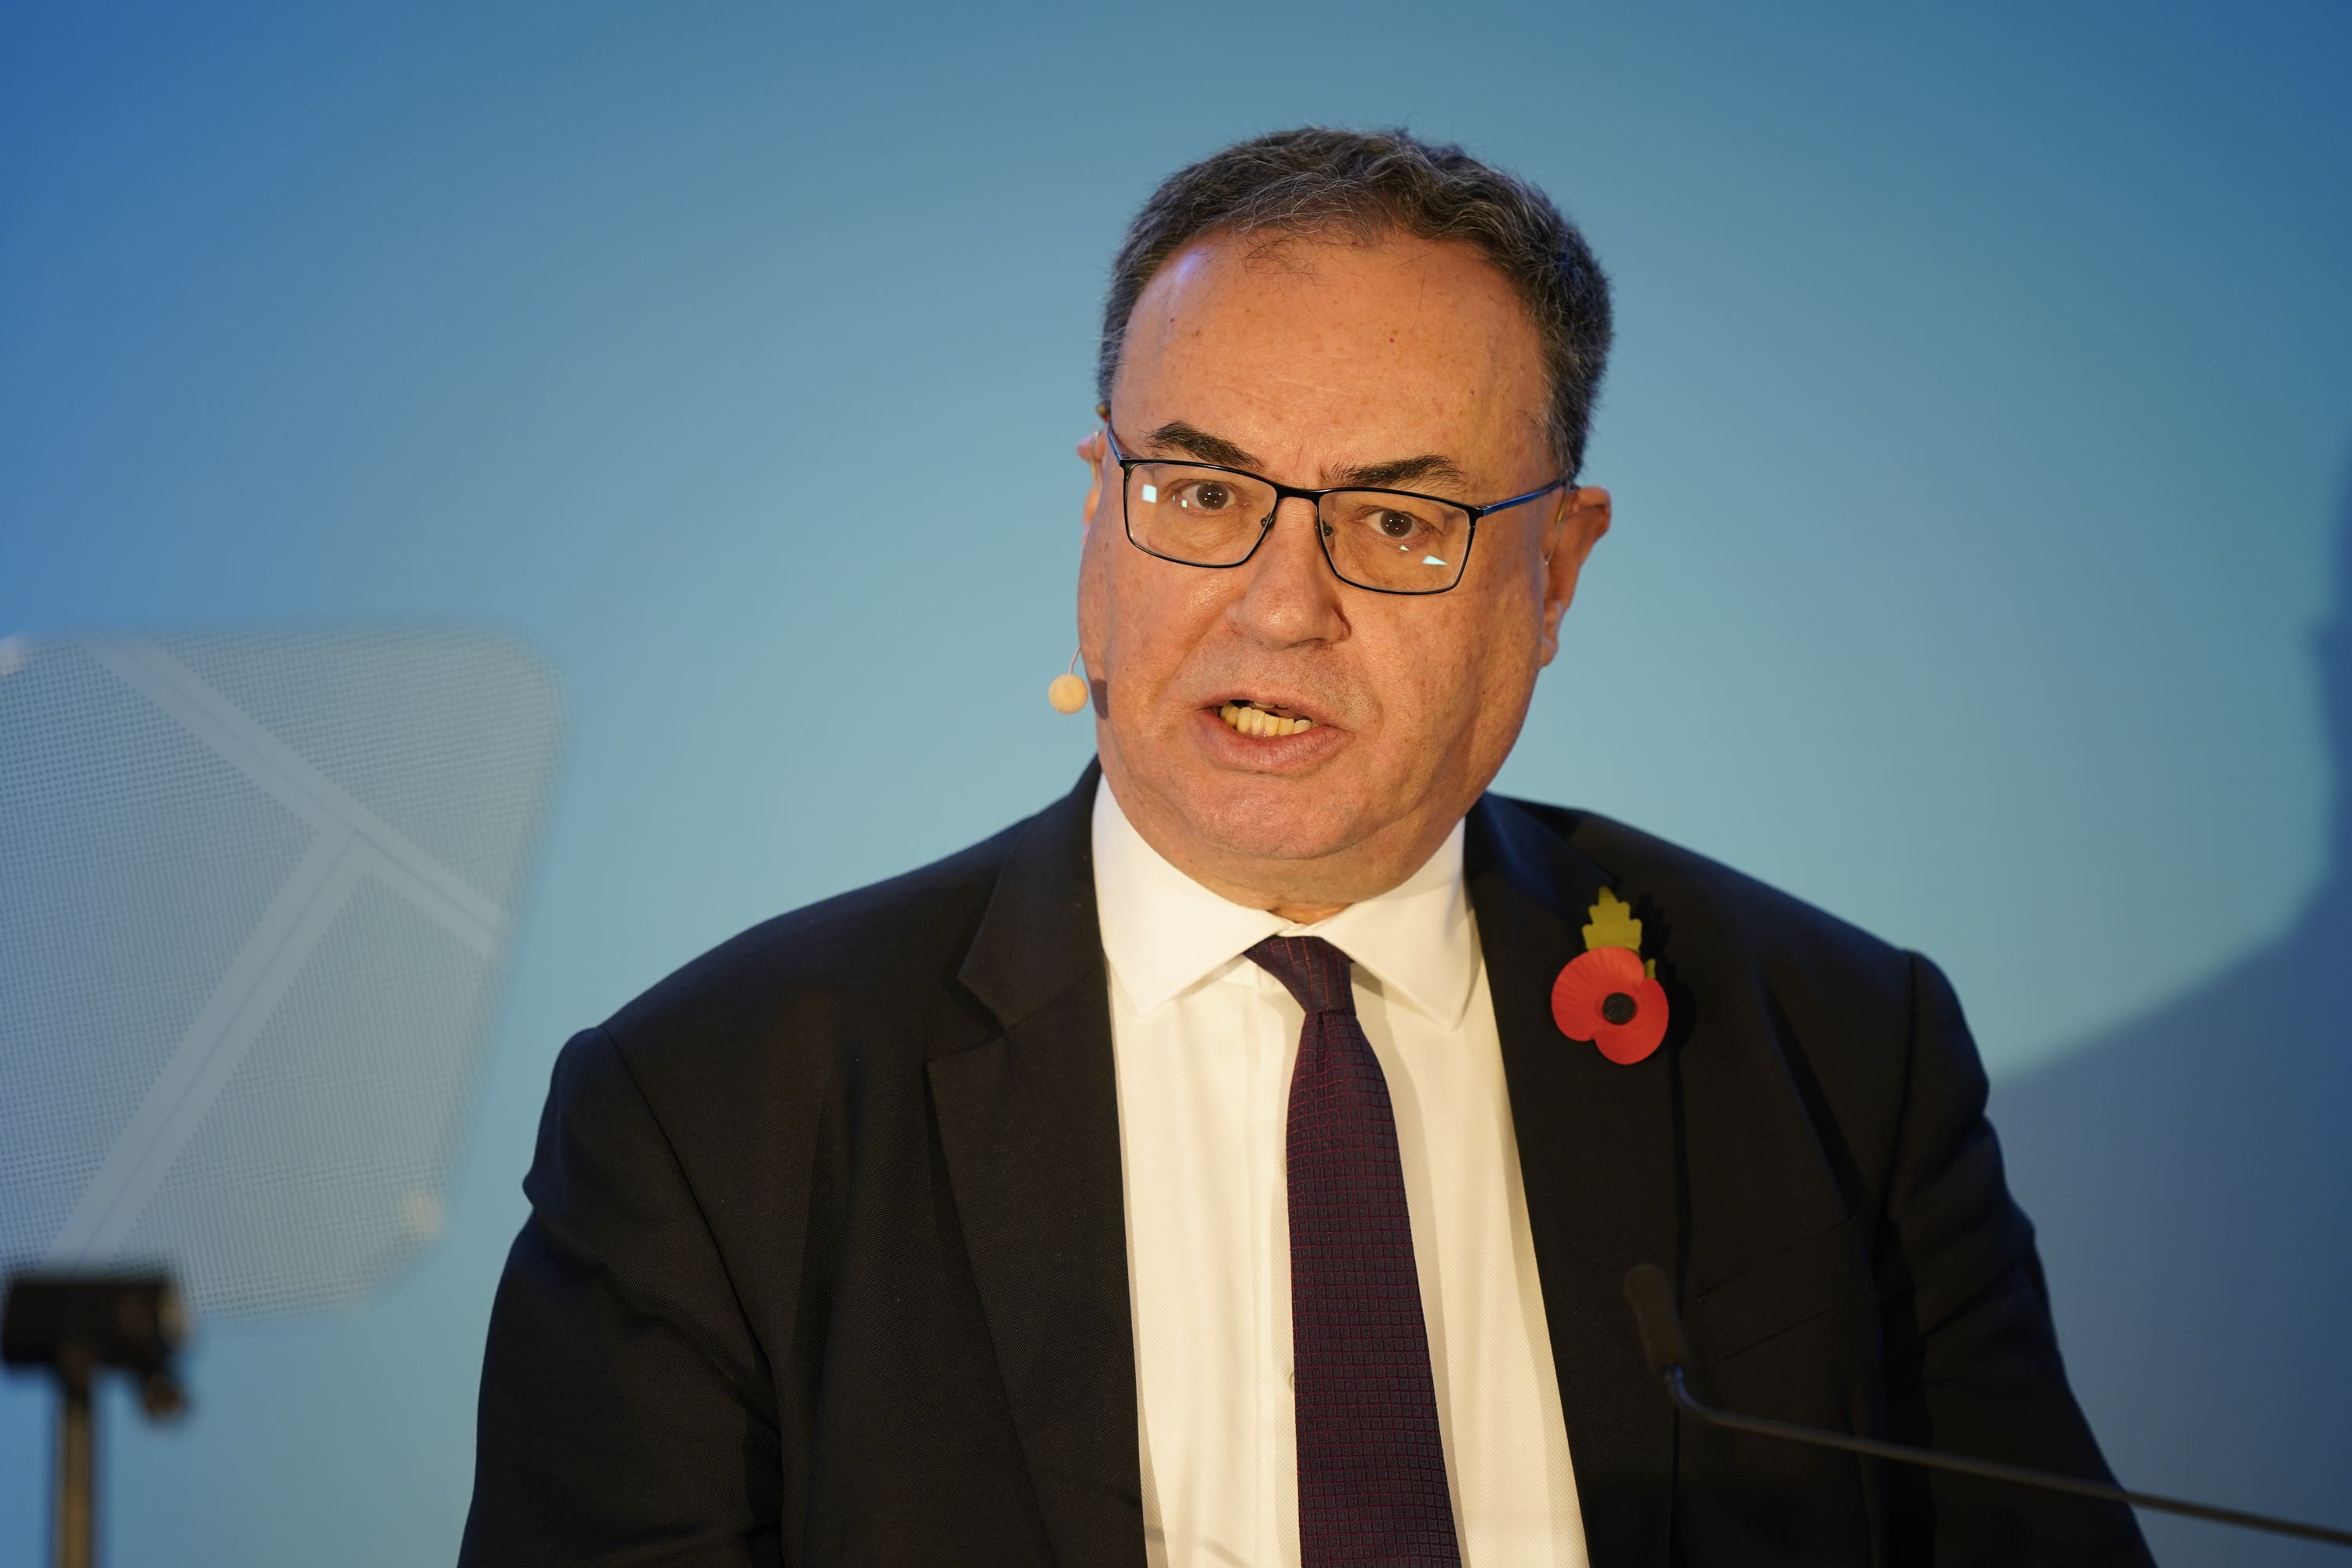 Bank of England governor Andrew Bailey will reveal new base rate on Thursday